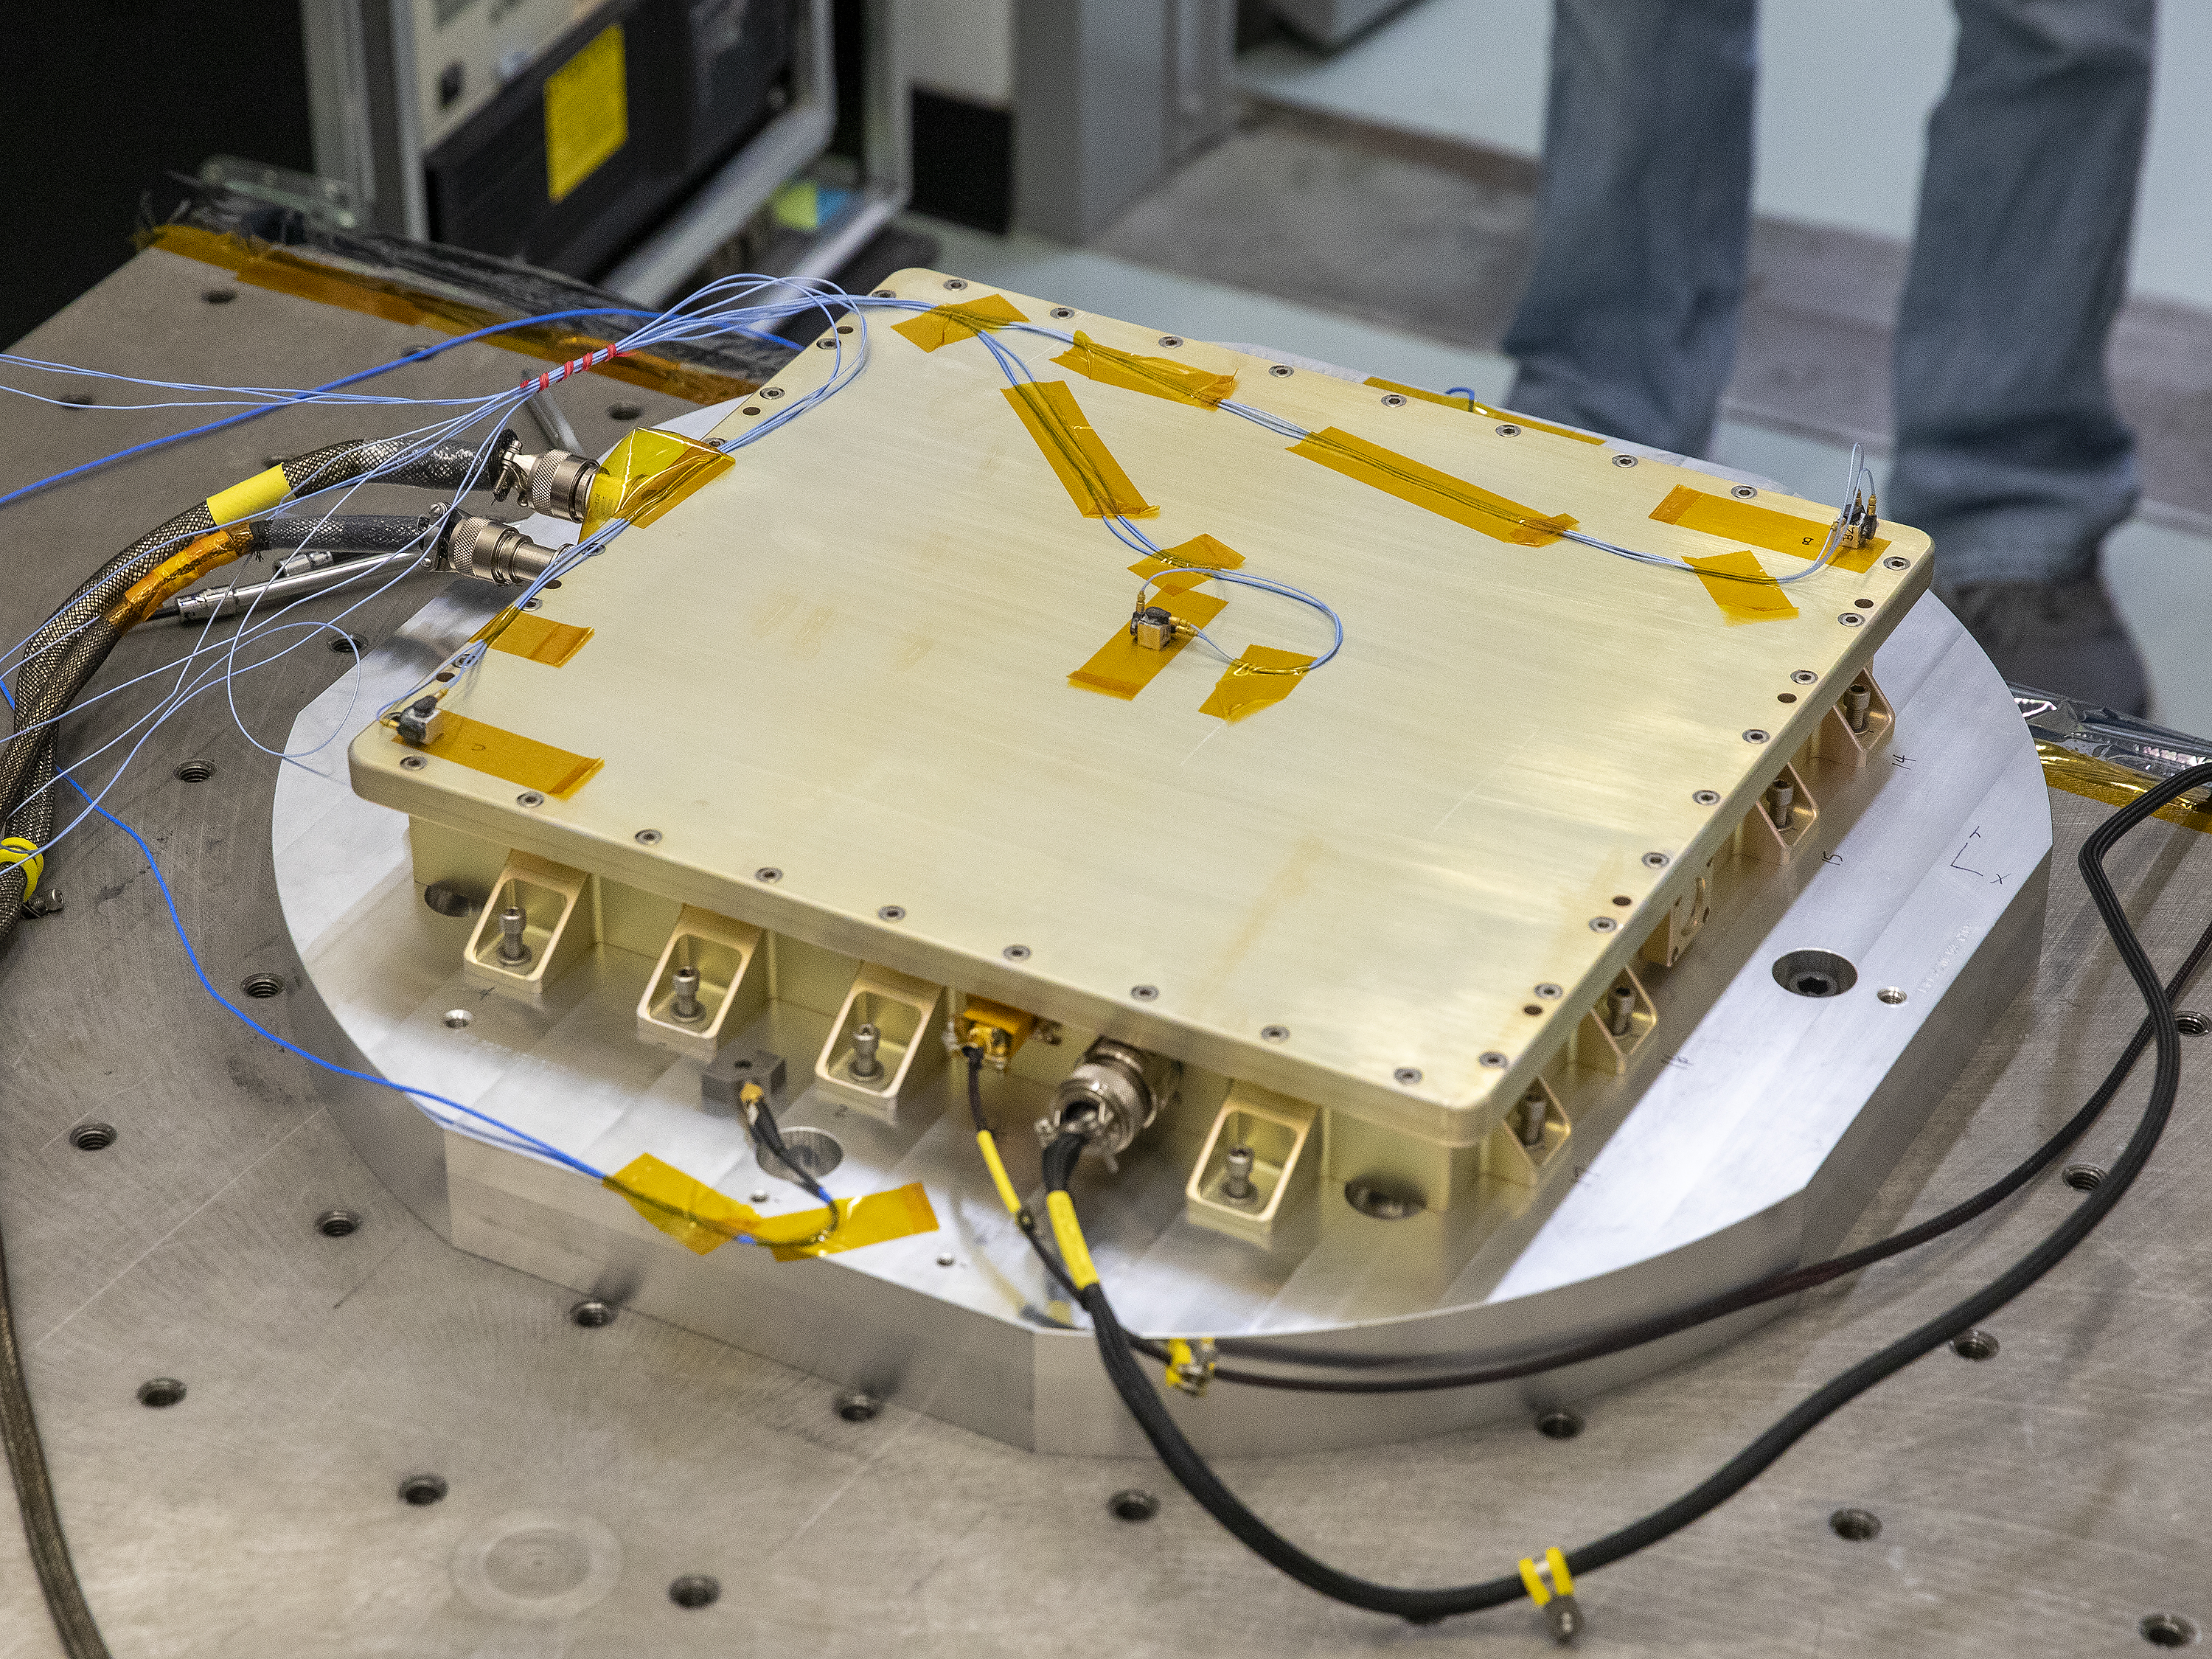 The CLARREO Pathfinder Team at LaRC completes assembly of the Power Converter Unit (PCU), which is responsible for directing power to the rest of the payload.  